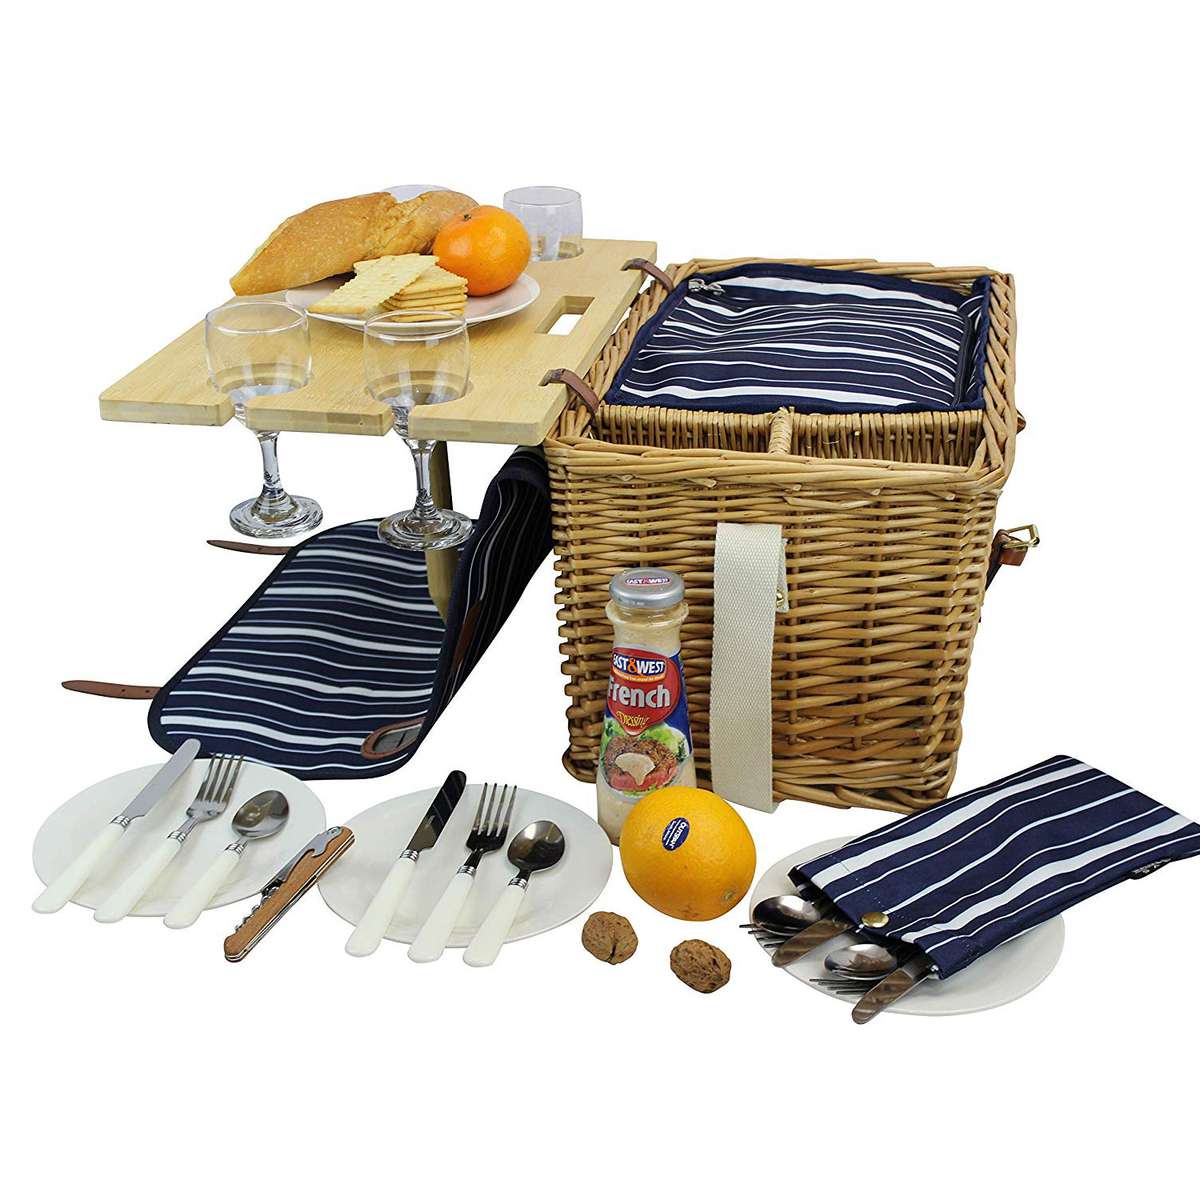 Buy Paradiso Picnic Basket 40x28x20cm Online Shop Home And Garden On Carrefour Uae